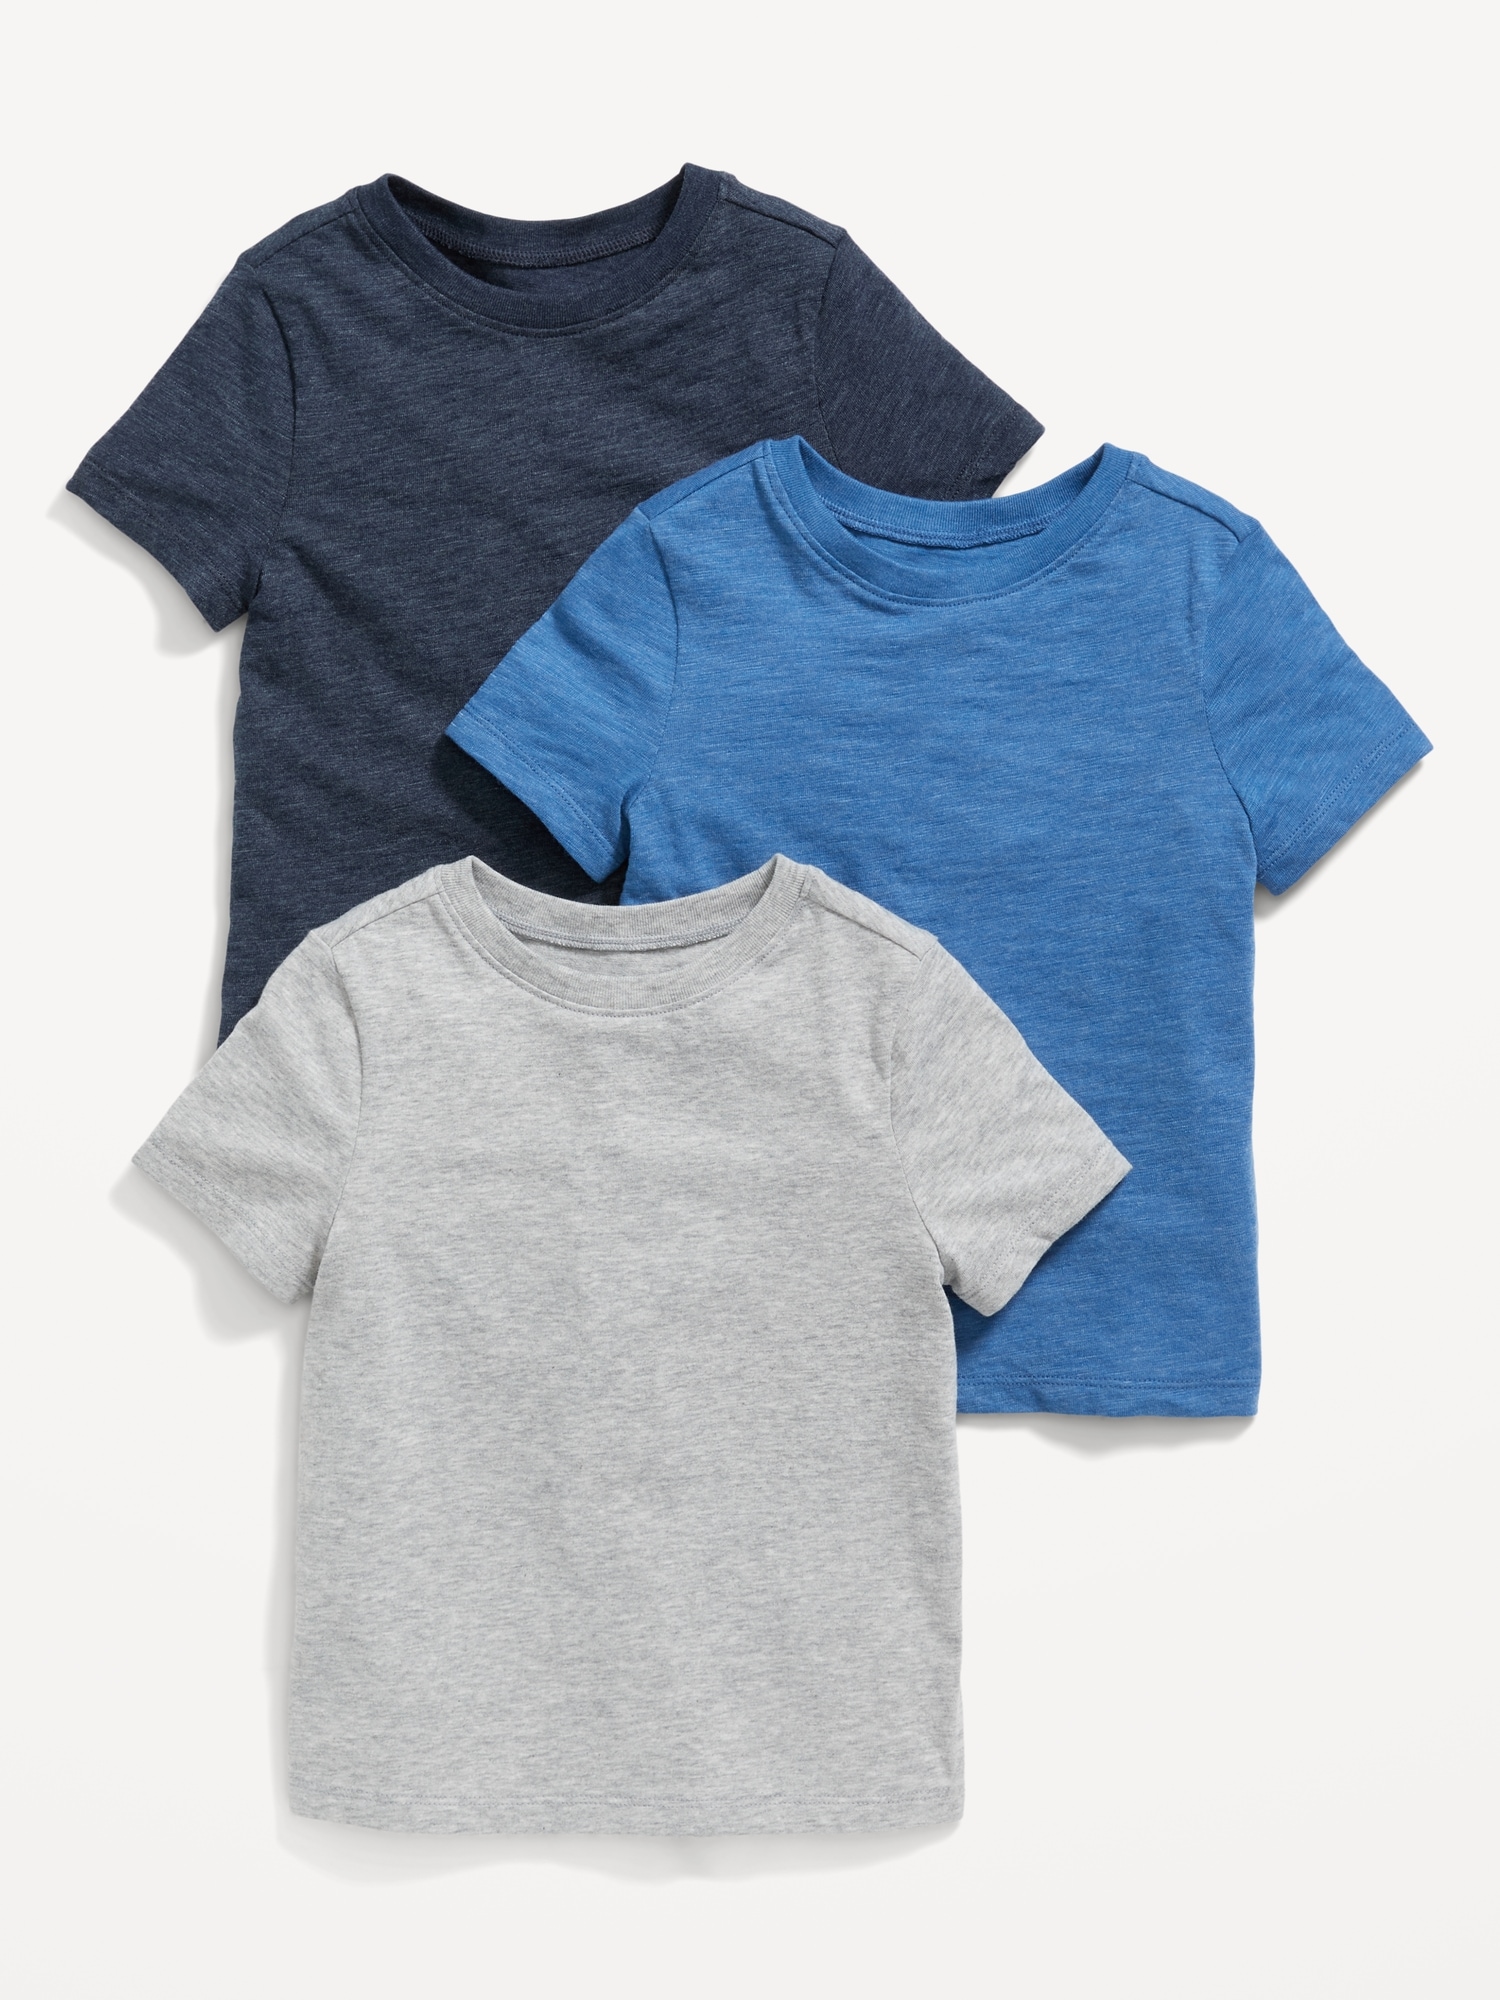 Basic T-Shirts for Kids | Old Navy